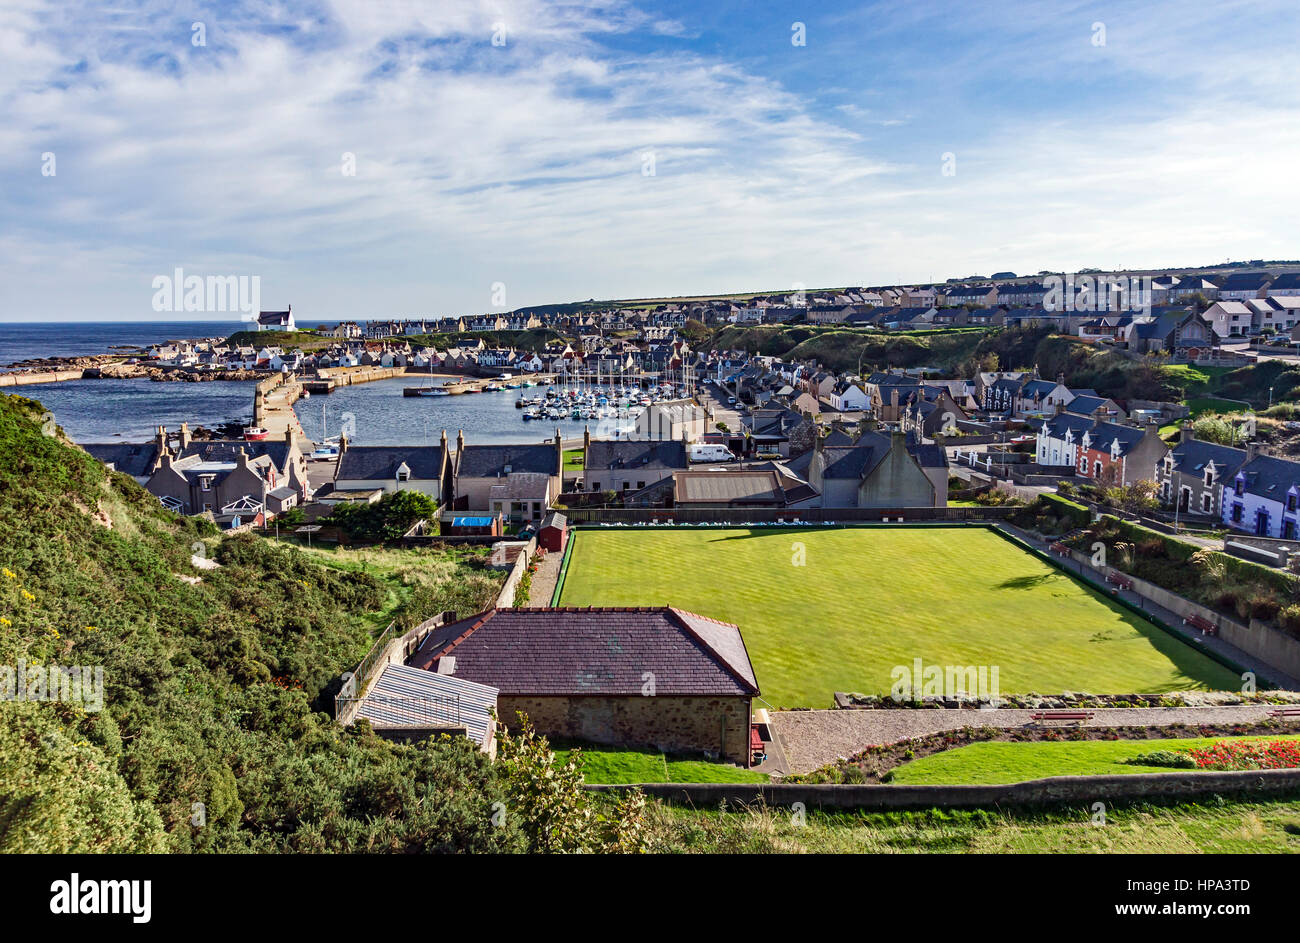 Findochty town and harbour area in Findochty Moray Scotland with bowling green in the foreground. Stock Photo